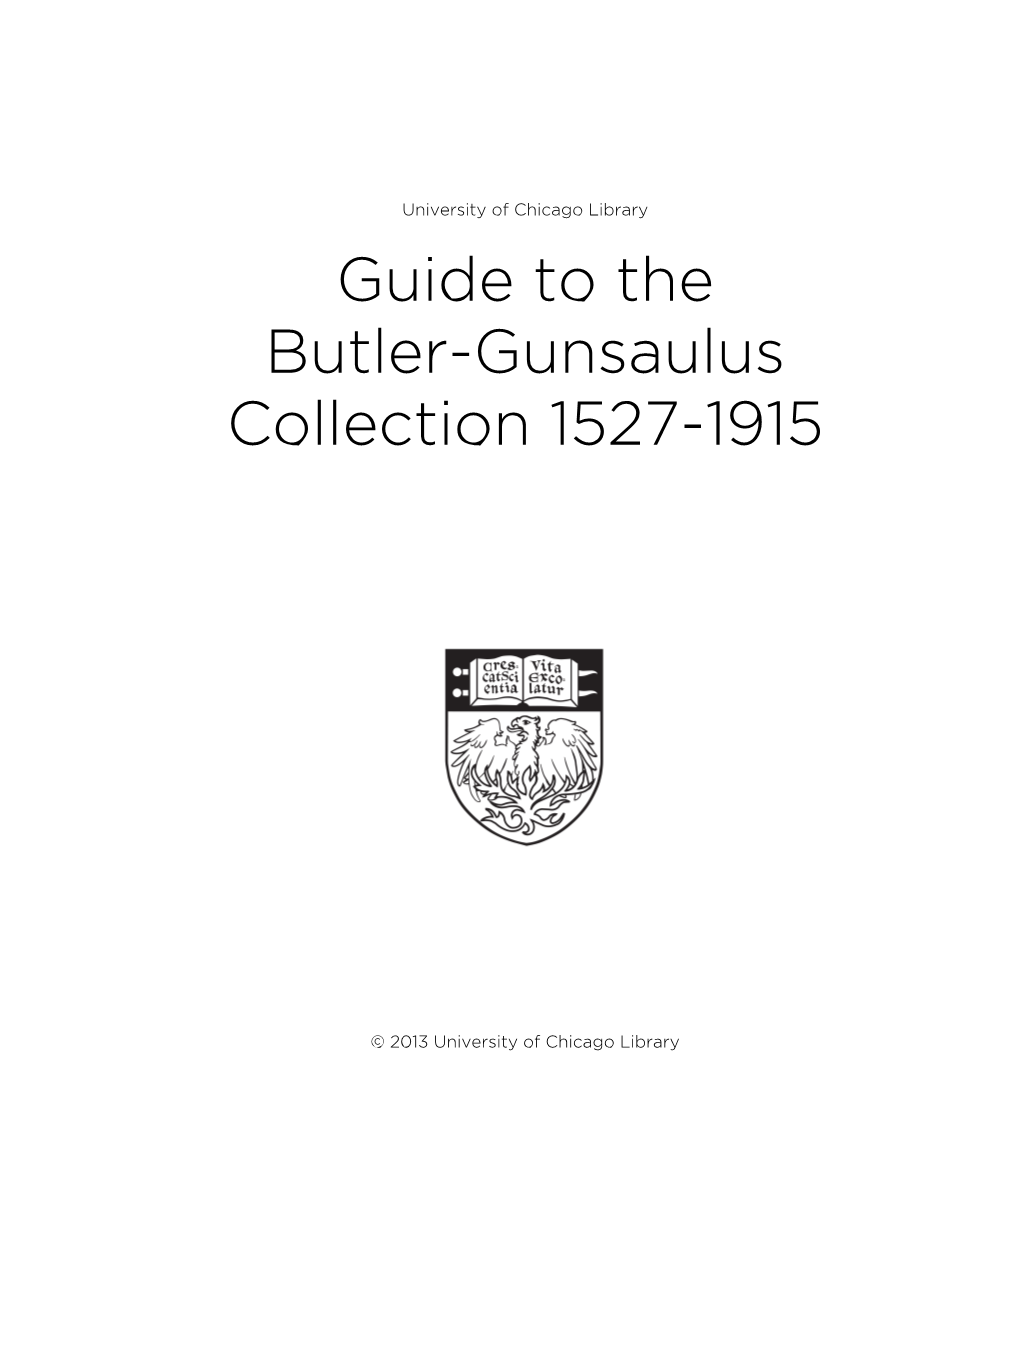 Guide to the Butler-Gunsaulus Collection 1527-1915